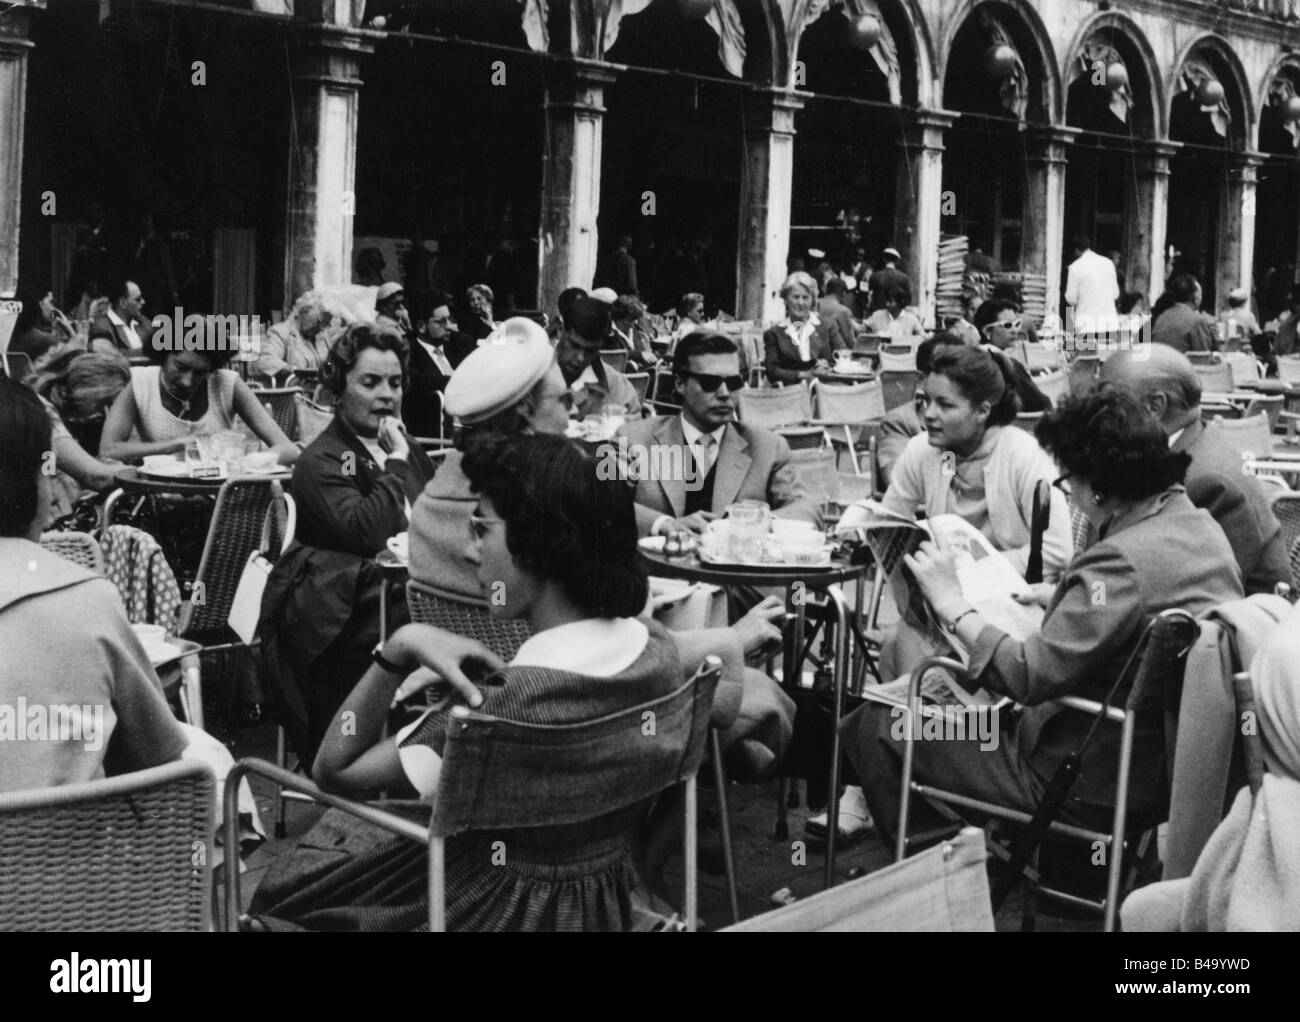 Schneider, Romy, 23.9.1938 - 29.5.1982, German actress, with mother Magda, Karlheinz Boehm, sitting in street cafe, Piazza San Marco, Venice, middle of 1950s, Stock Photo